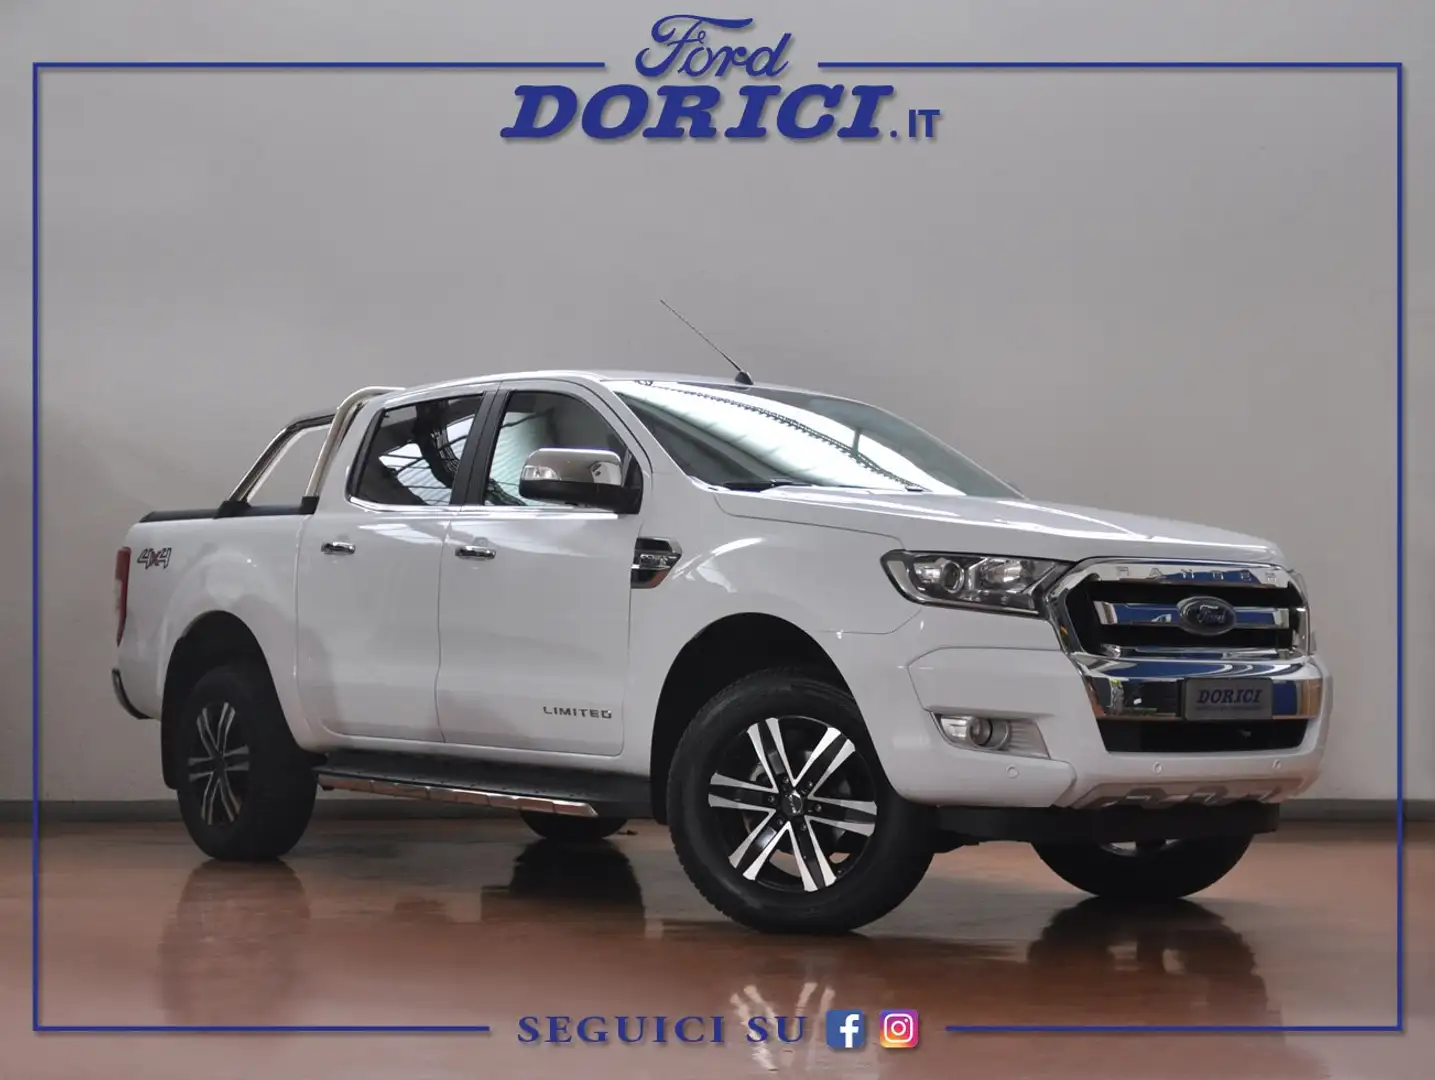 Ford Ranger 3.2 Tdci 200cv Double Cab Limited Auto + IVA Blanc - 1